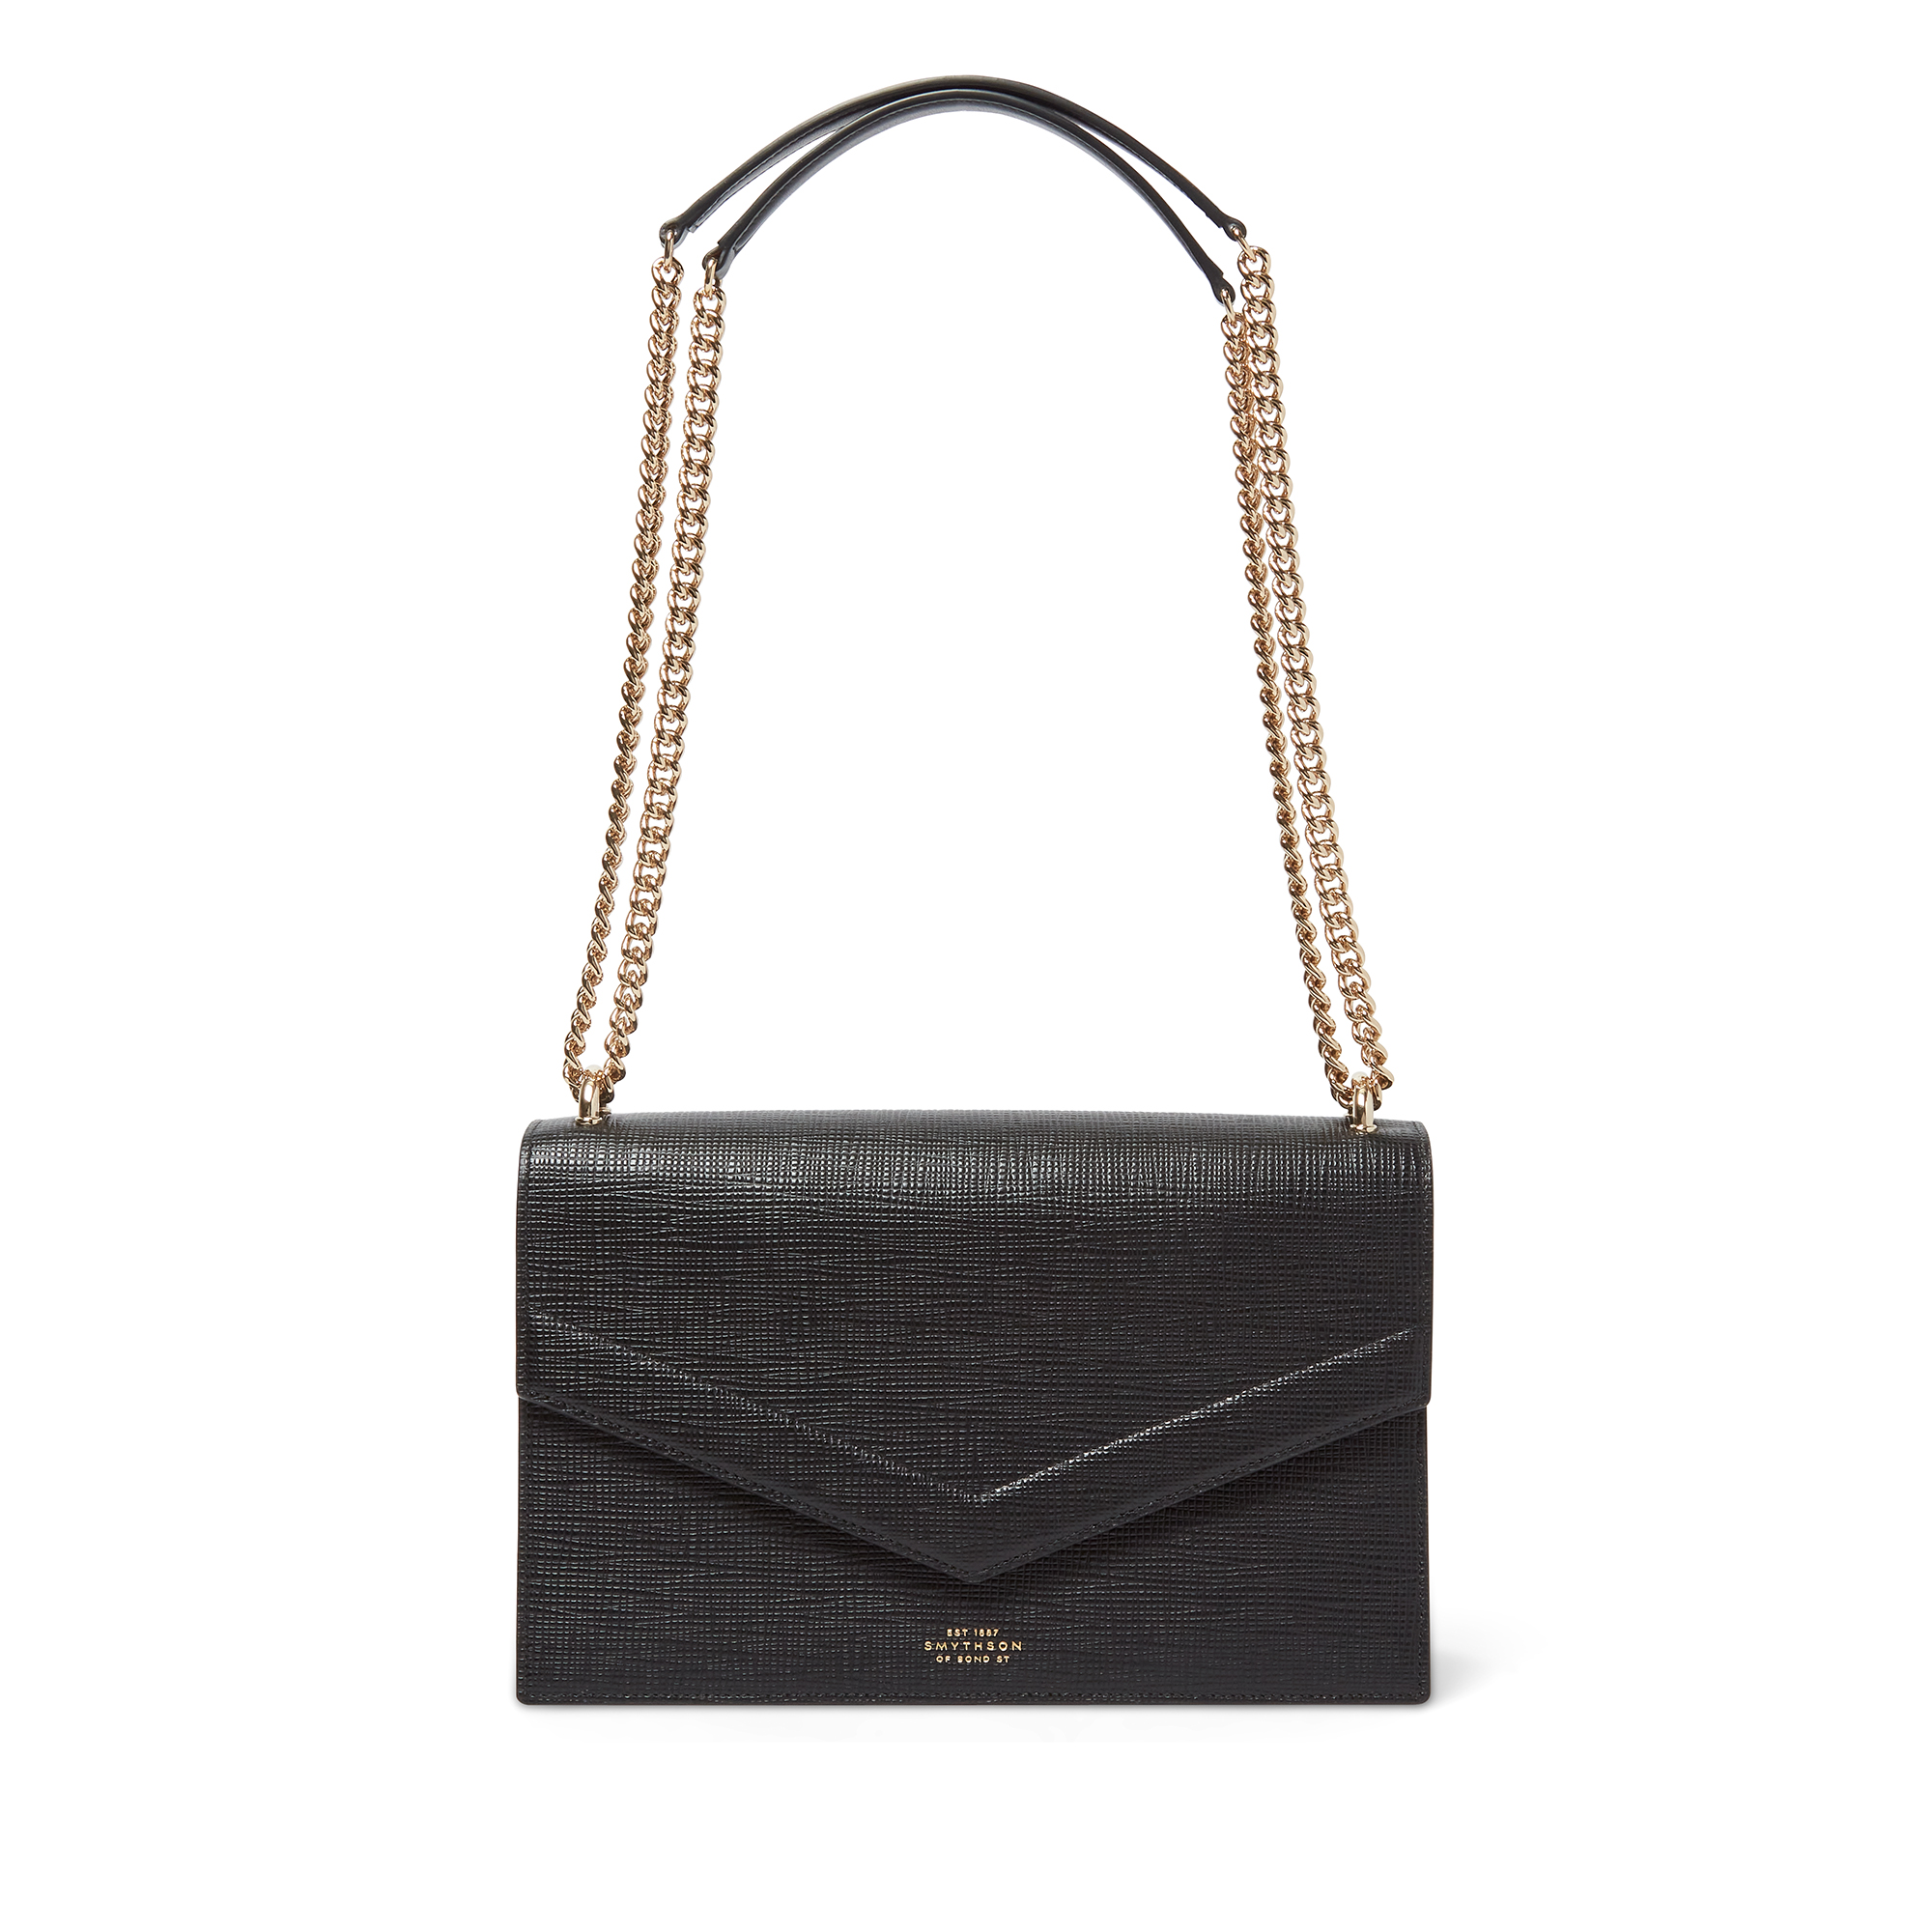 Smythson Envelope Bag with Chain in Panama